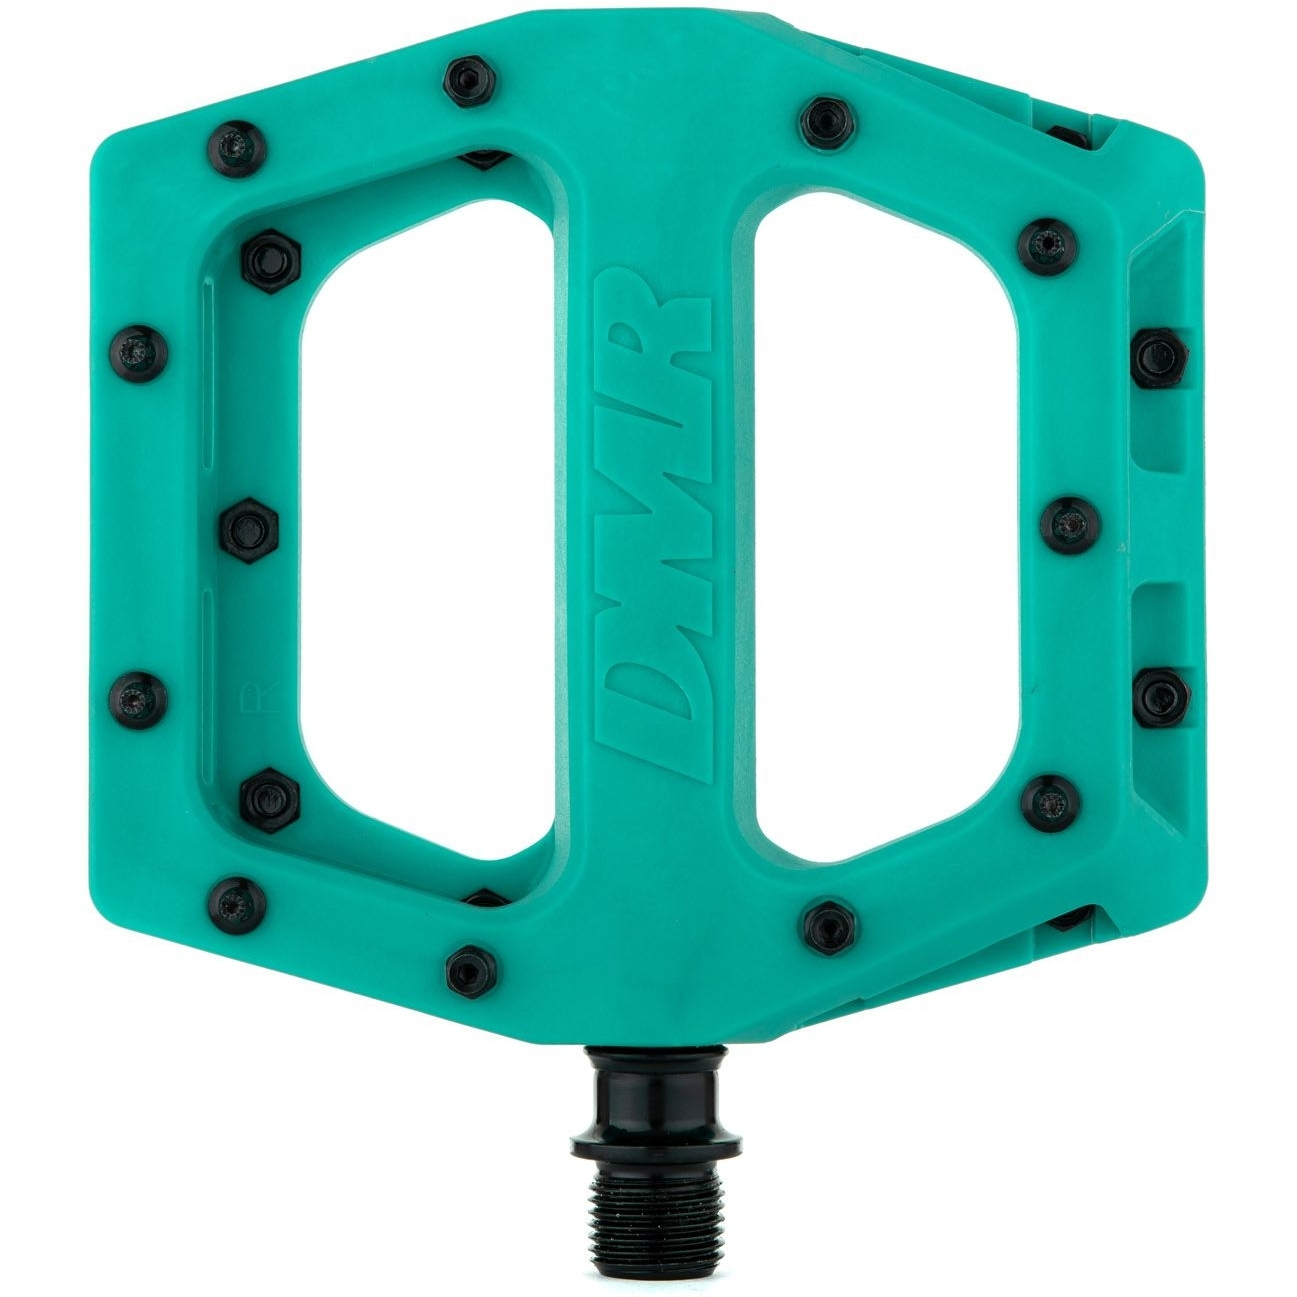 Image of DMR V11 Flat Pedals - turquoise